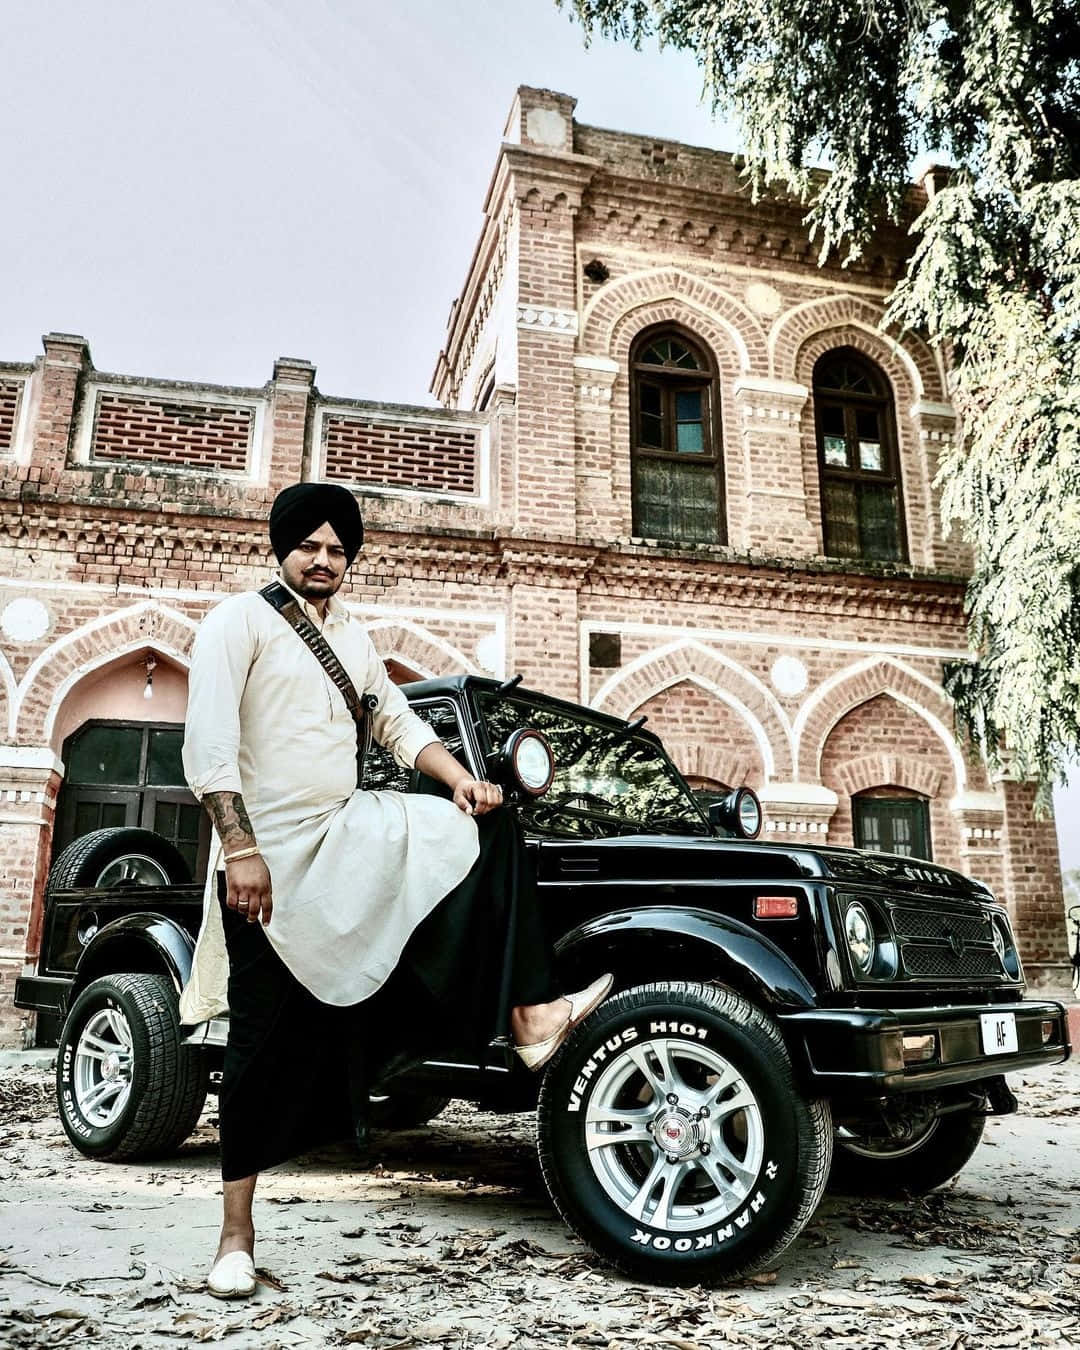 A Man In A Turban Standing Next To A Jeep